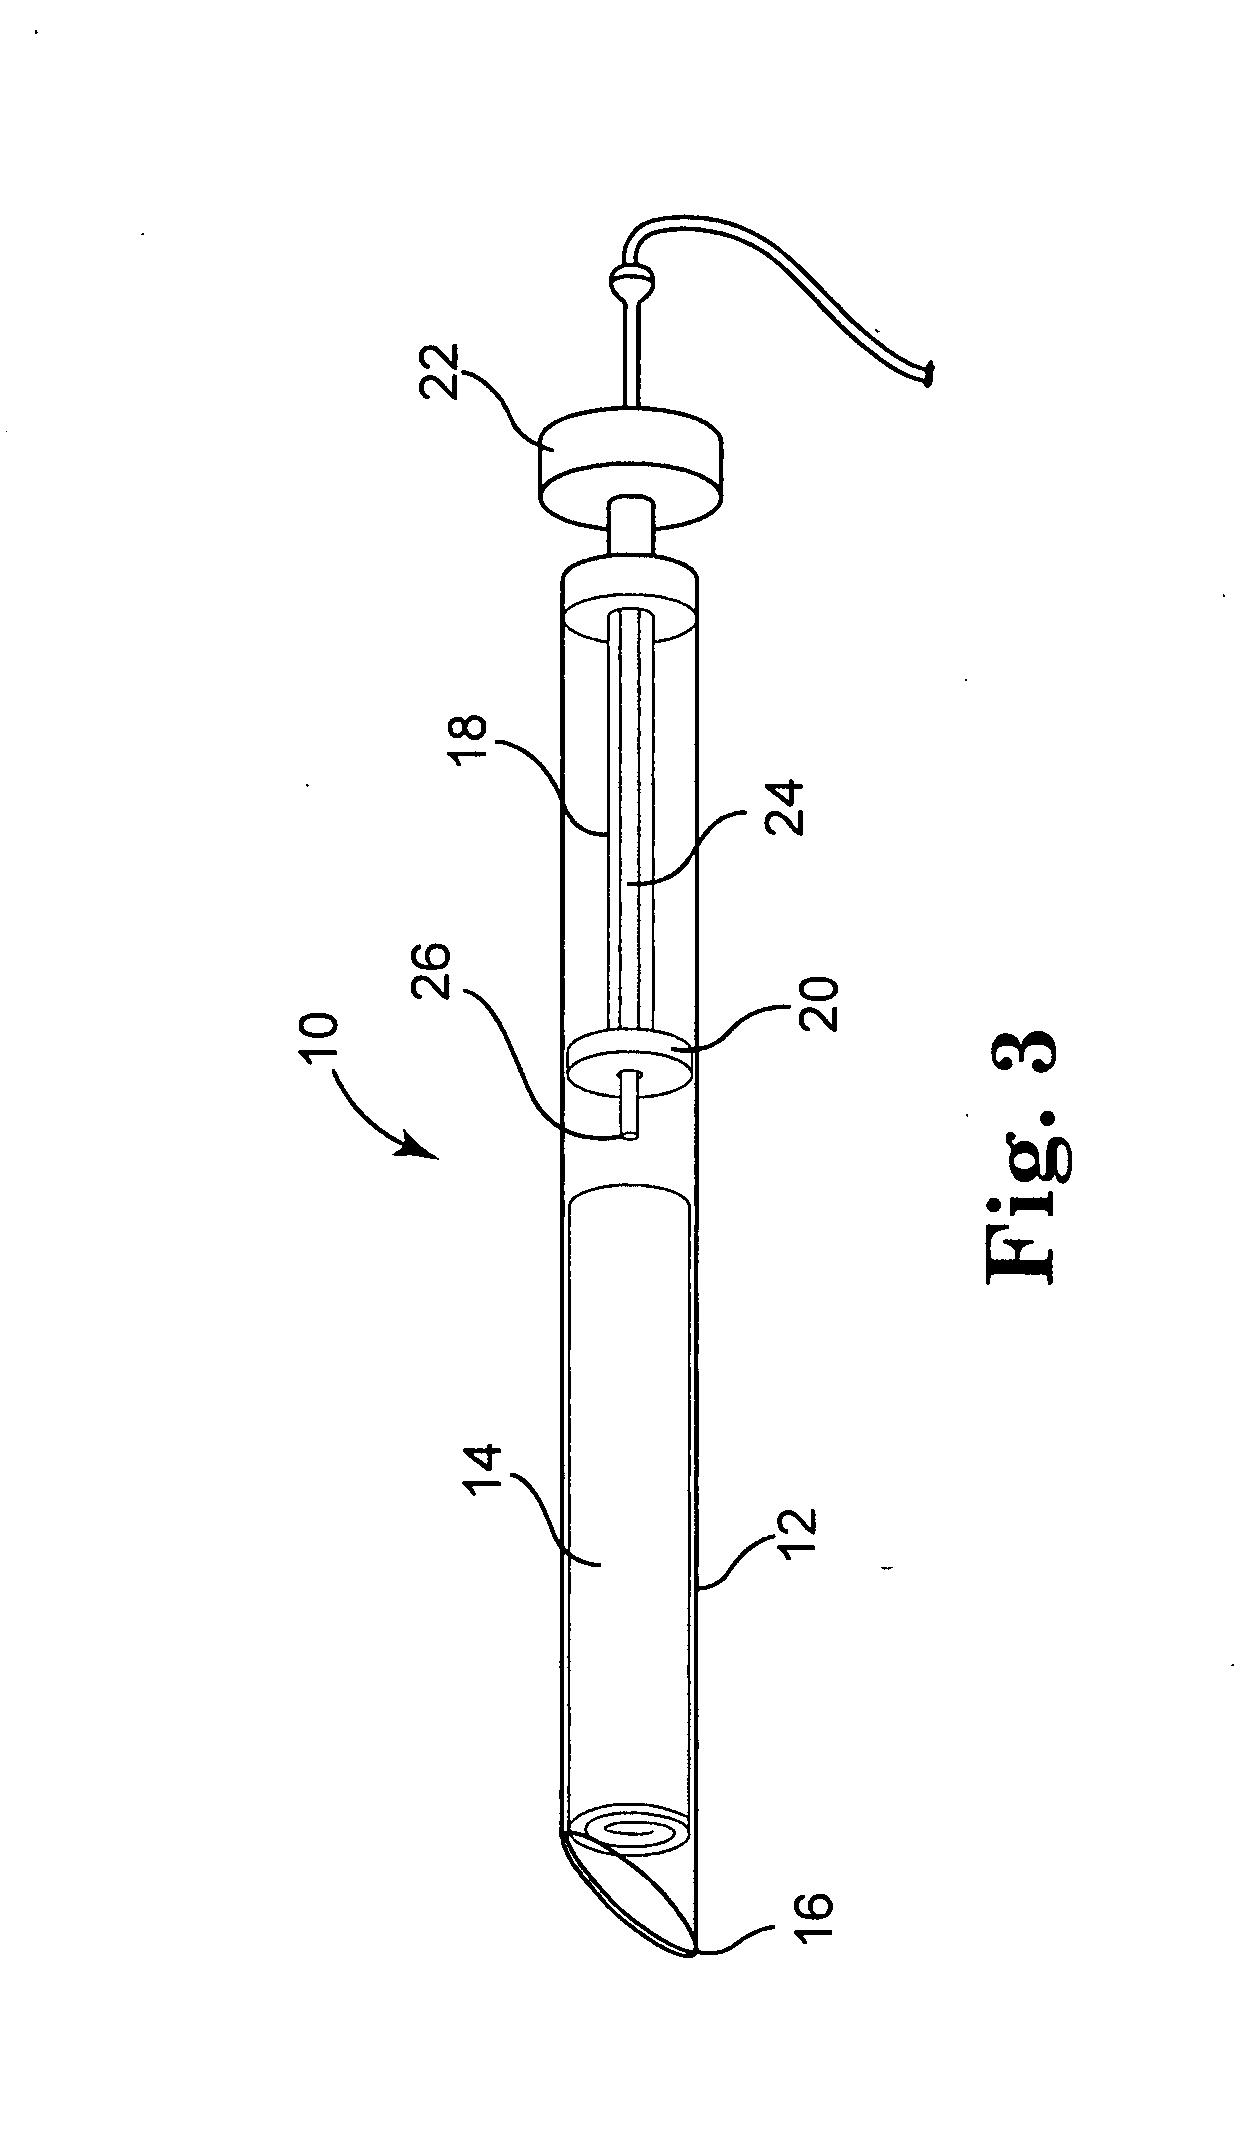 Hydrogel-based joint repair system and method